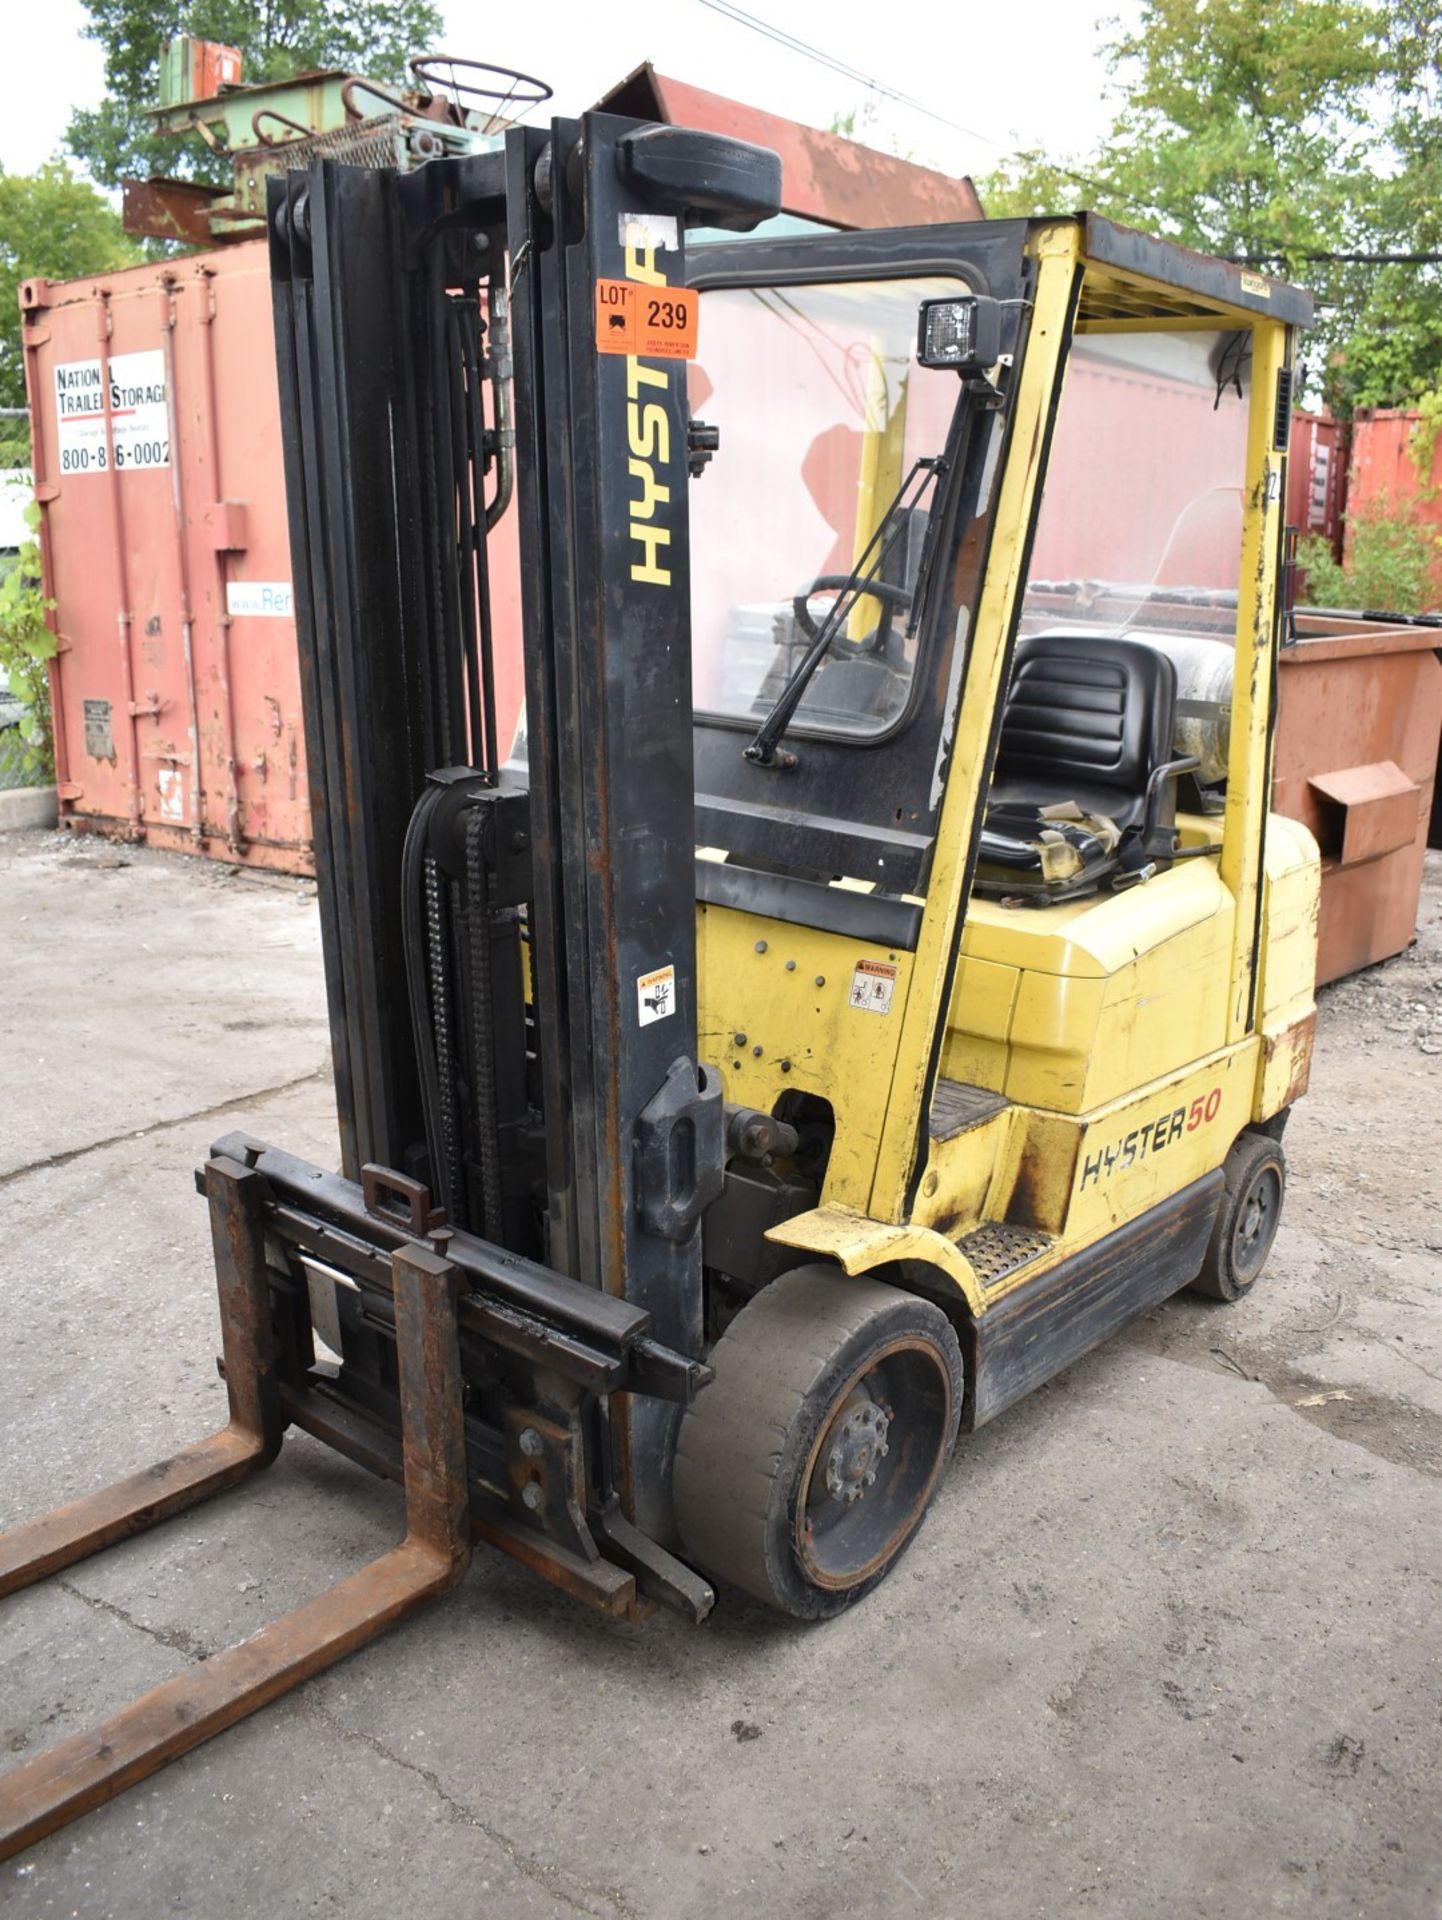 HYSTER S50XM 5,000 LB. CAPACITY LPG FORKLIFT WITH 189" MAX. LIFT HEIGHT, 3-STAGE MAST, SIDE SHIFT, - Image 2 of 16